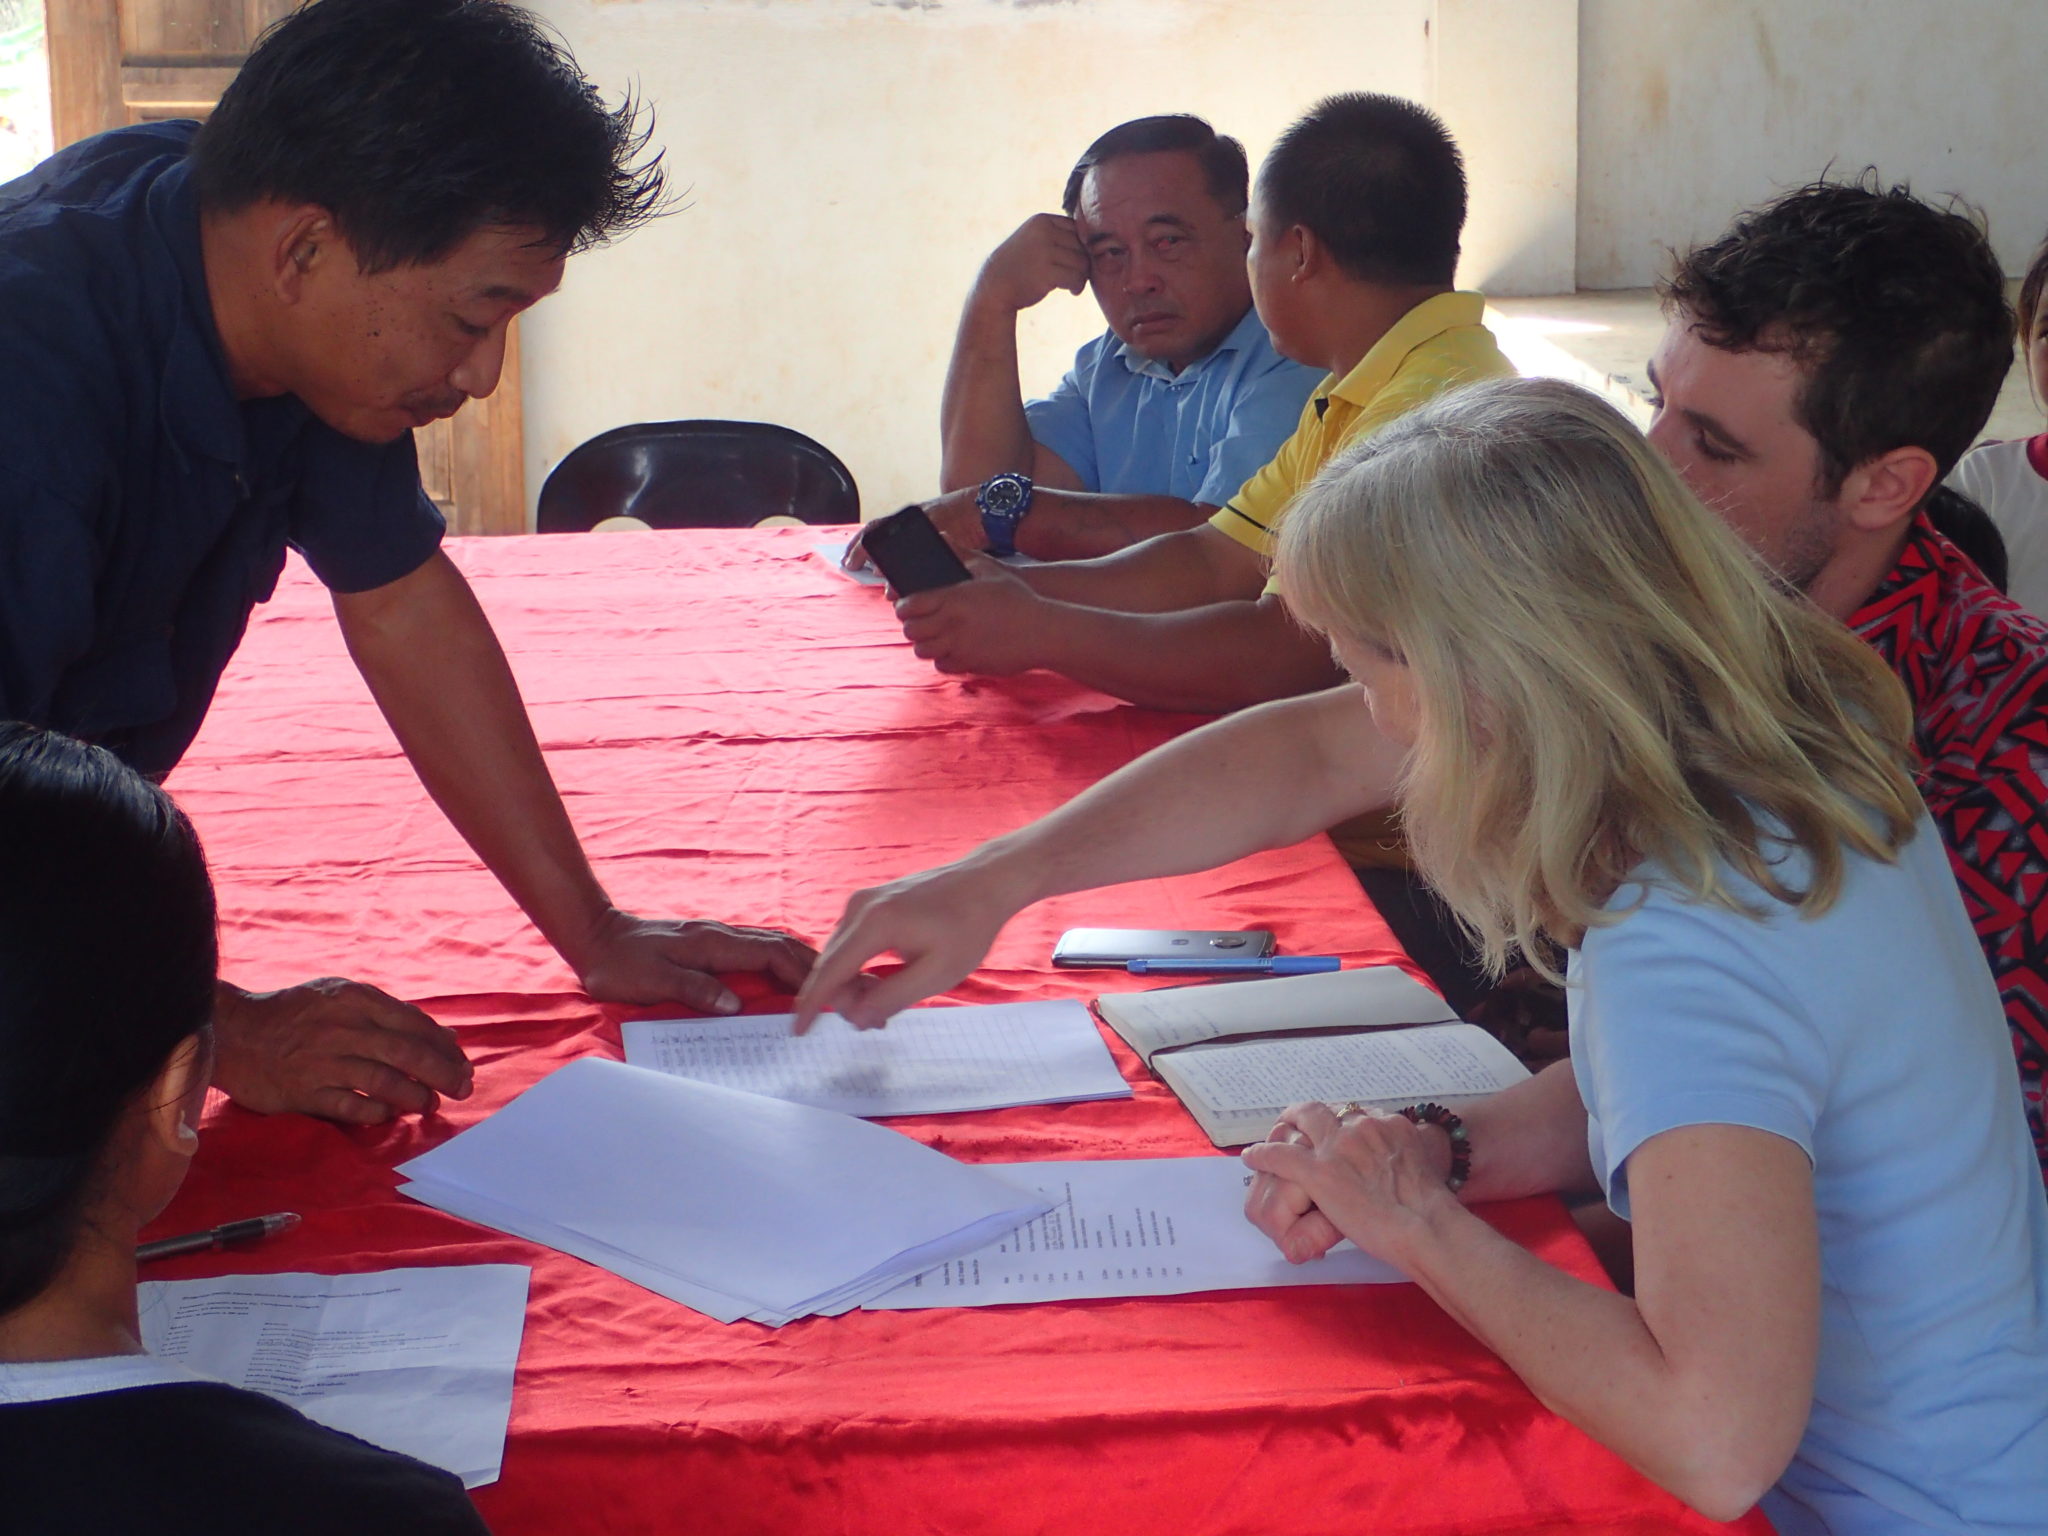 Villagers in Sabah, Malaysia discussing forest protection agreement with Seacology representatives